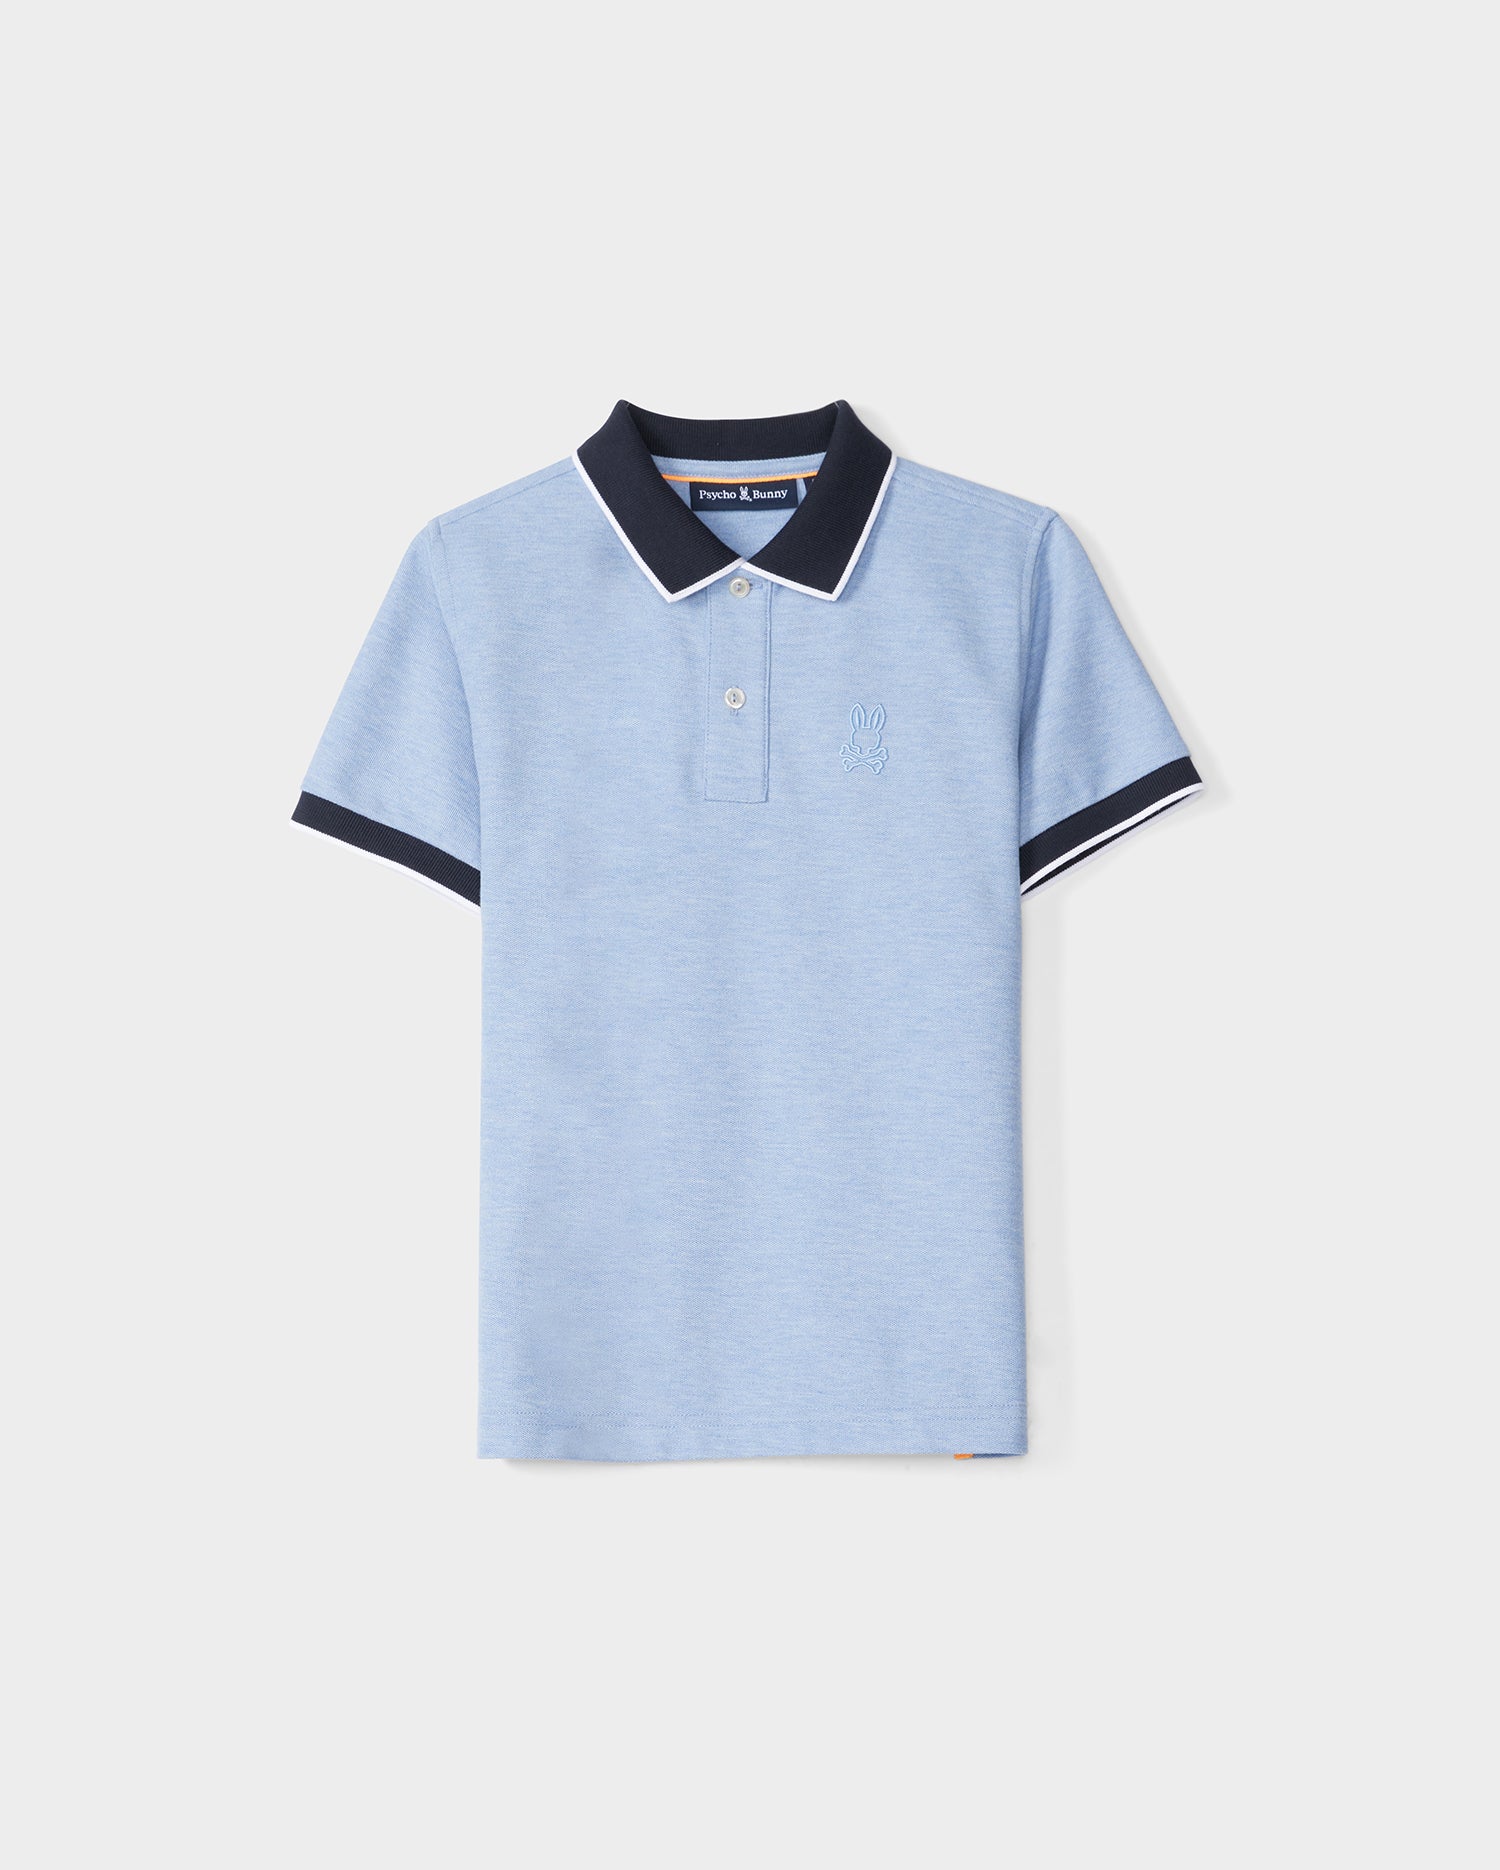 A KIDS WINDCREST PIQUE POLO SHIRT - B0K592C200 in light blue with a color blocked collar and sleeve trim. The dark blue collar features a white stripe on the edge, and the shirt has two buttons at the neckline. A raised-embroidered chest Bunny adorns the left chest area, set against a plain white background by Psycho Bunny.